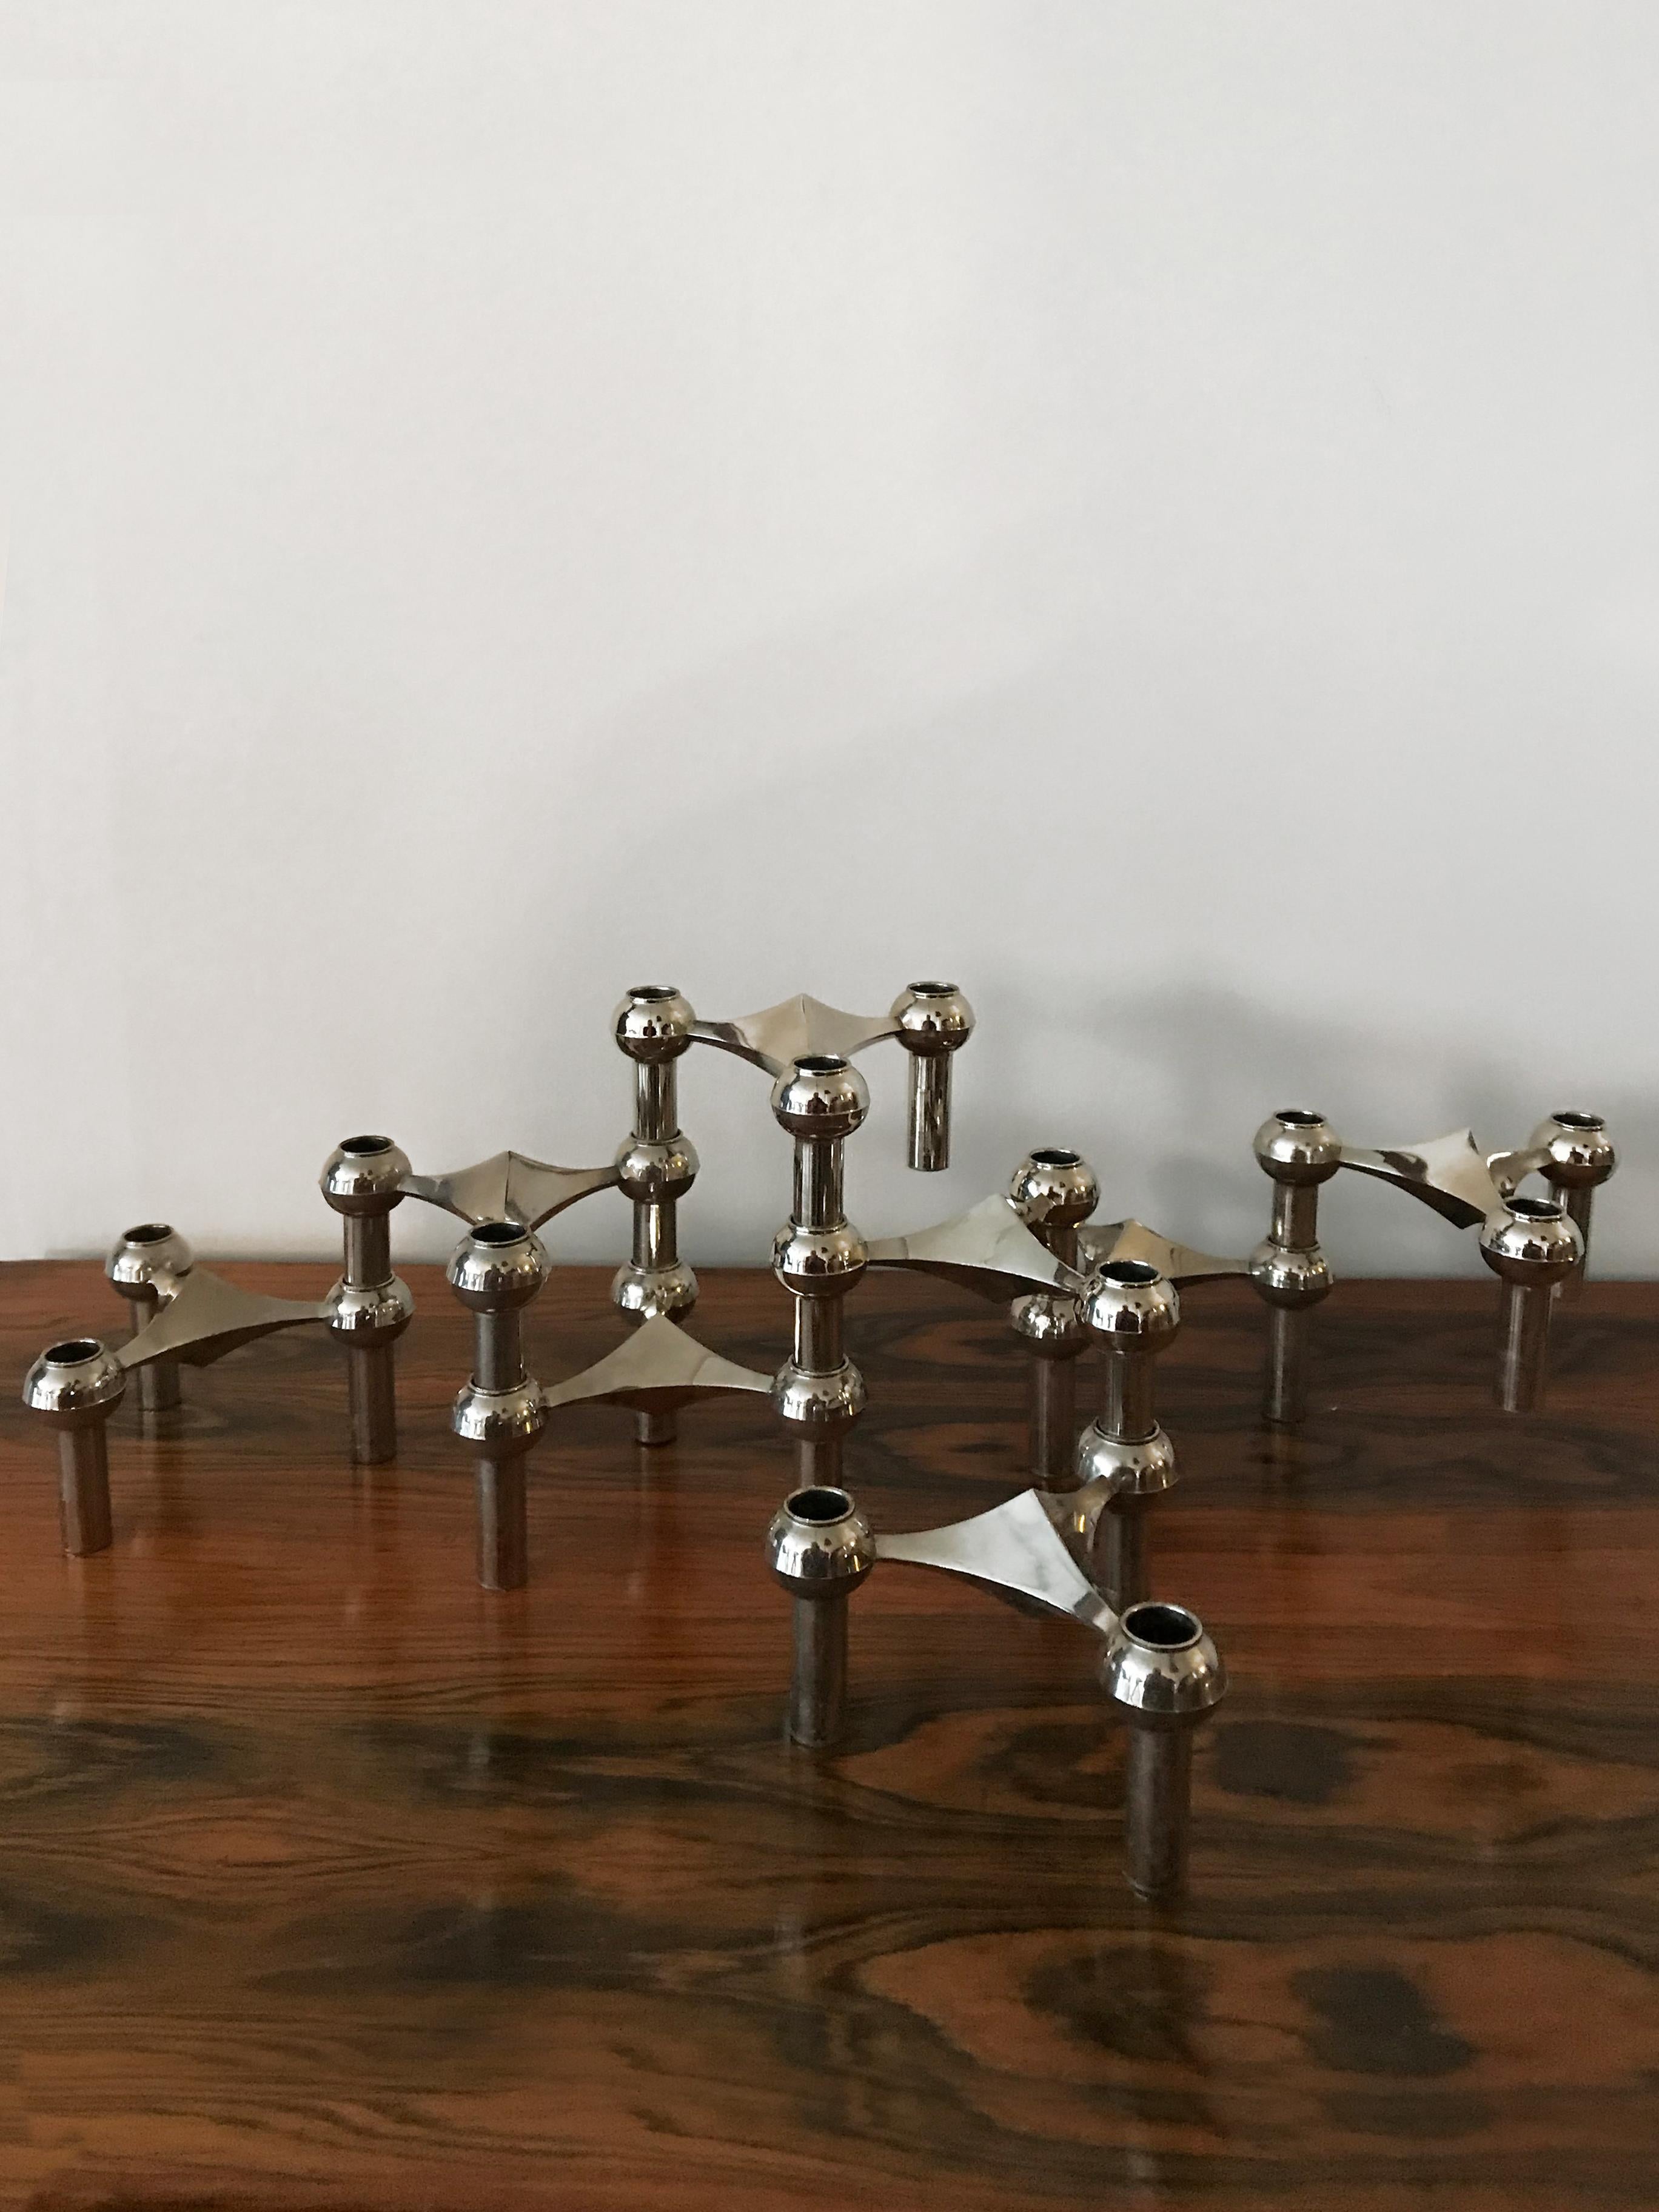 Mid-Century Modern design modular candleholders set in chromed metal
designed by Caeser Stoffi & Fritz Nagel for BMF Nagel, made in Germany from 1960s

Please note that the items are original of the period and this shows normal signs of age and